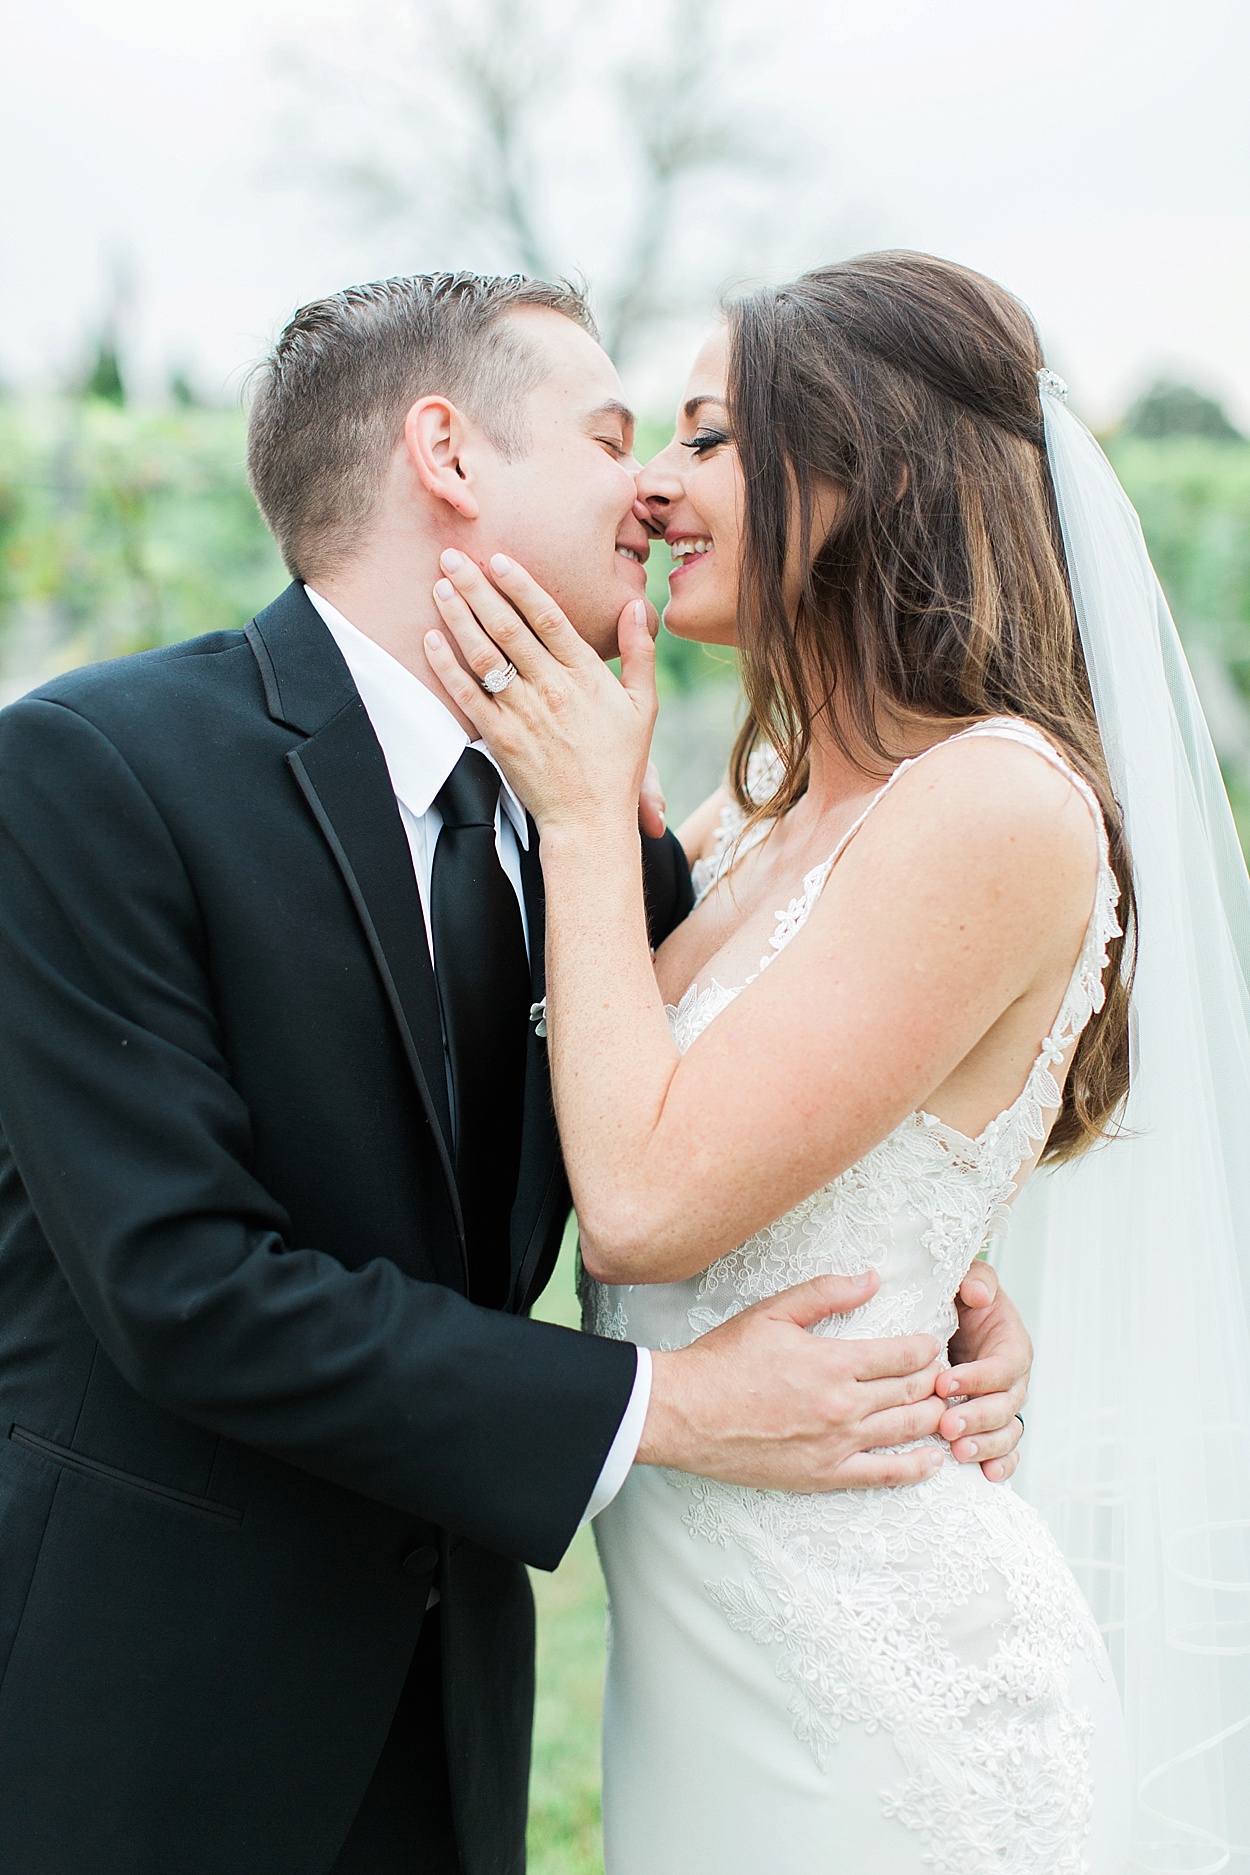 Champagne + merlot Virginia winery wedding at Morais Vineyard | photography by Abby Grace